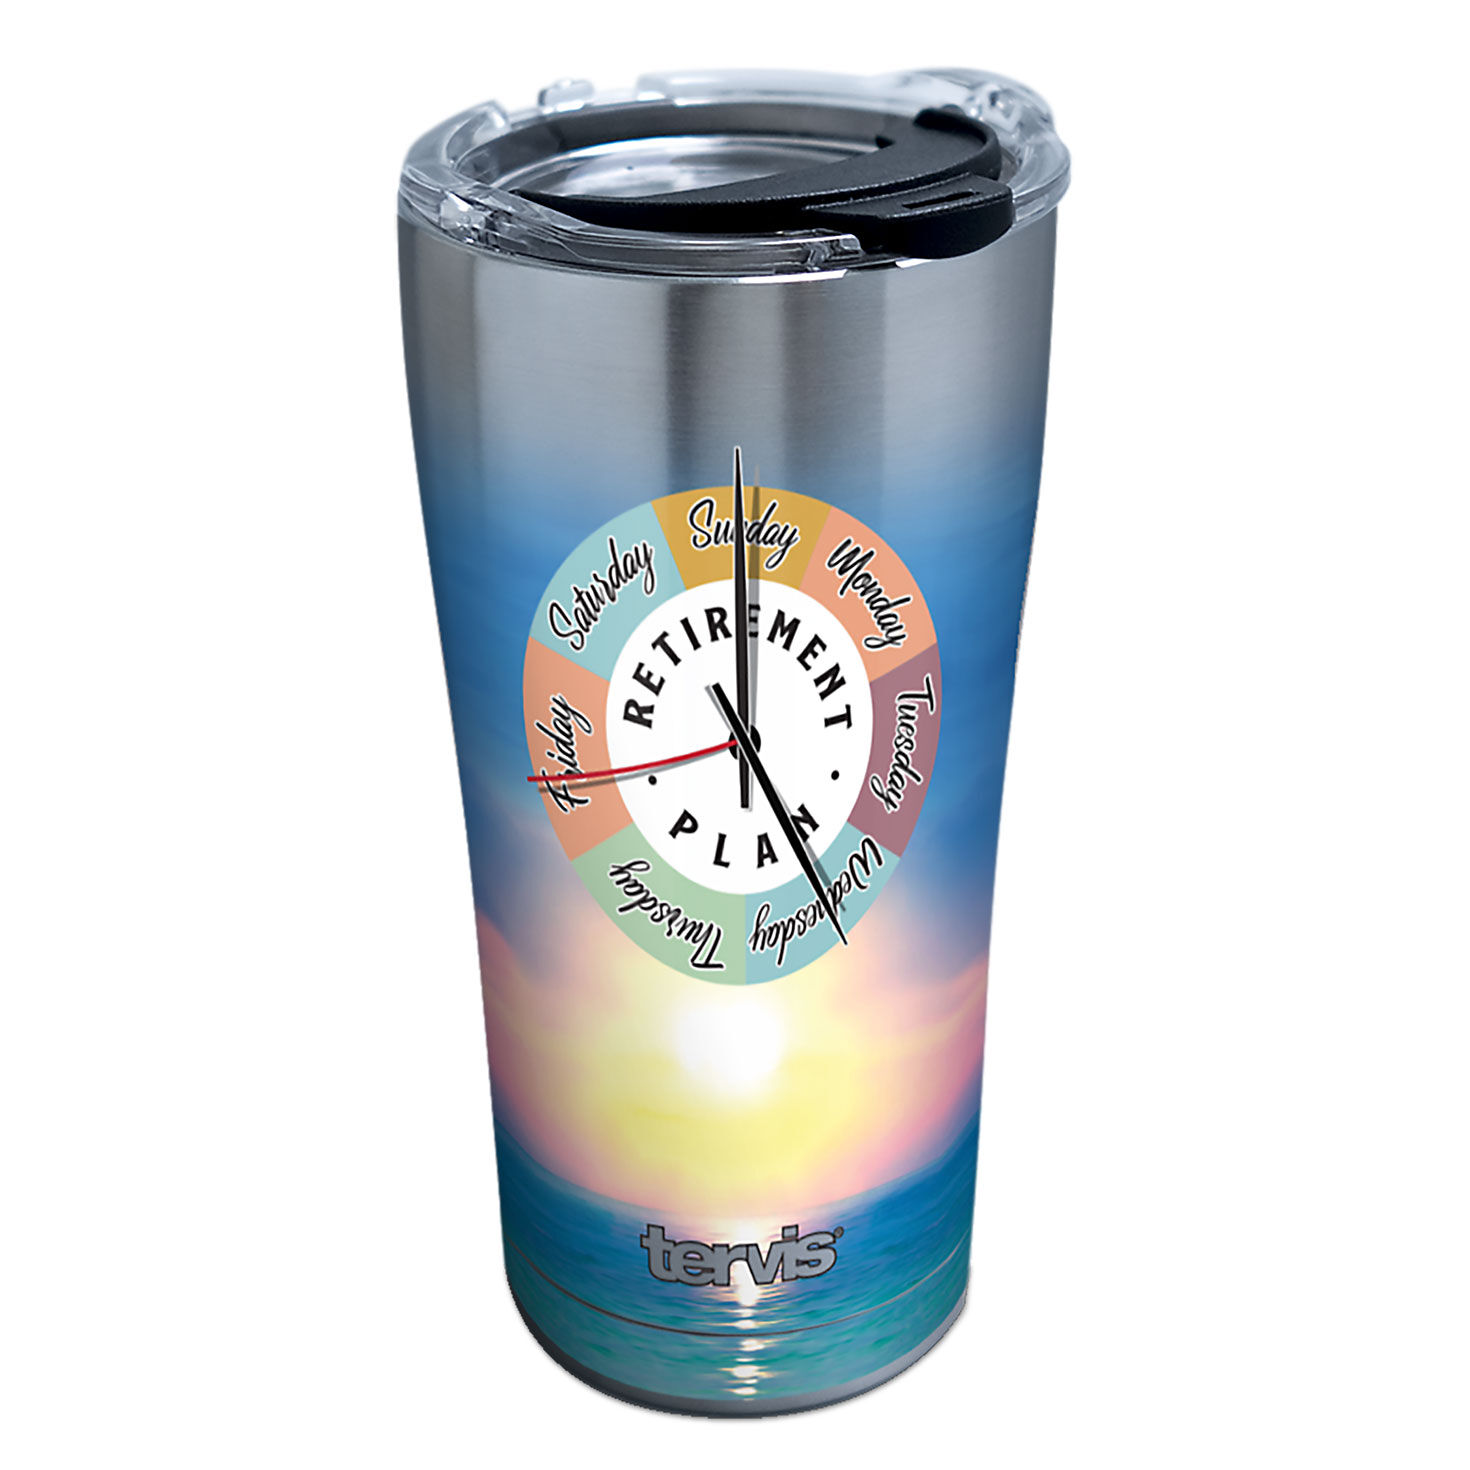 Easter Faith with Cross Religious 20 oz insulated tumbler with lid